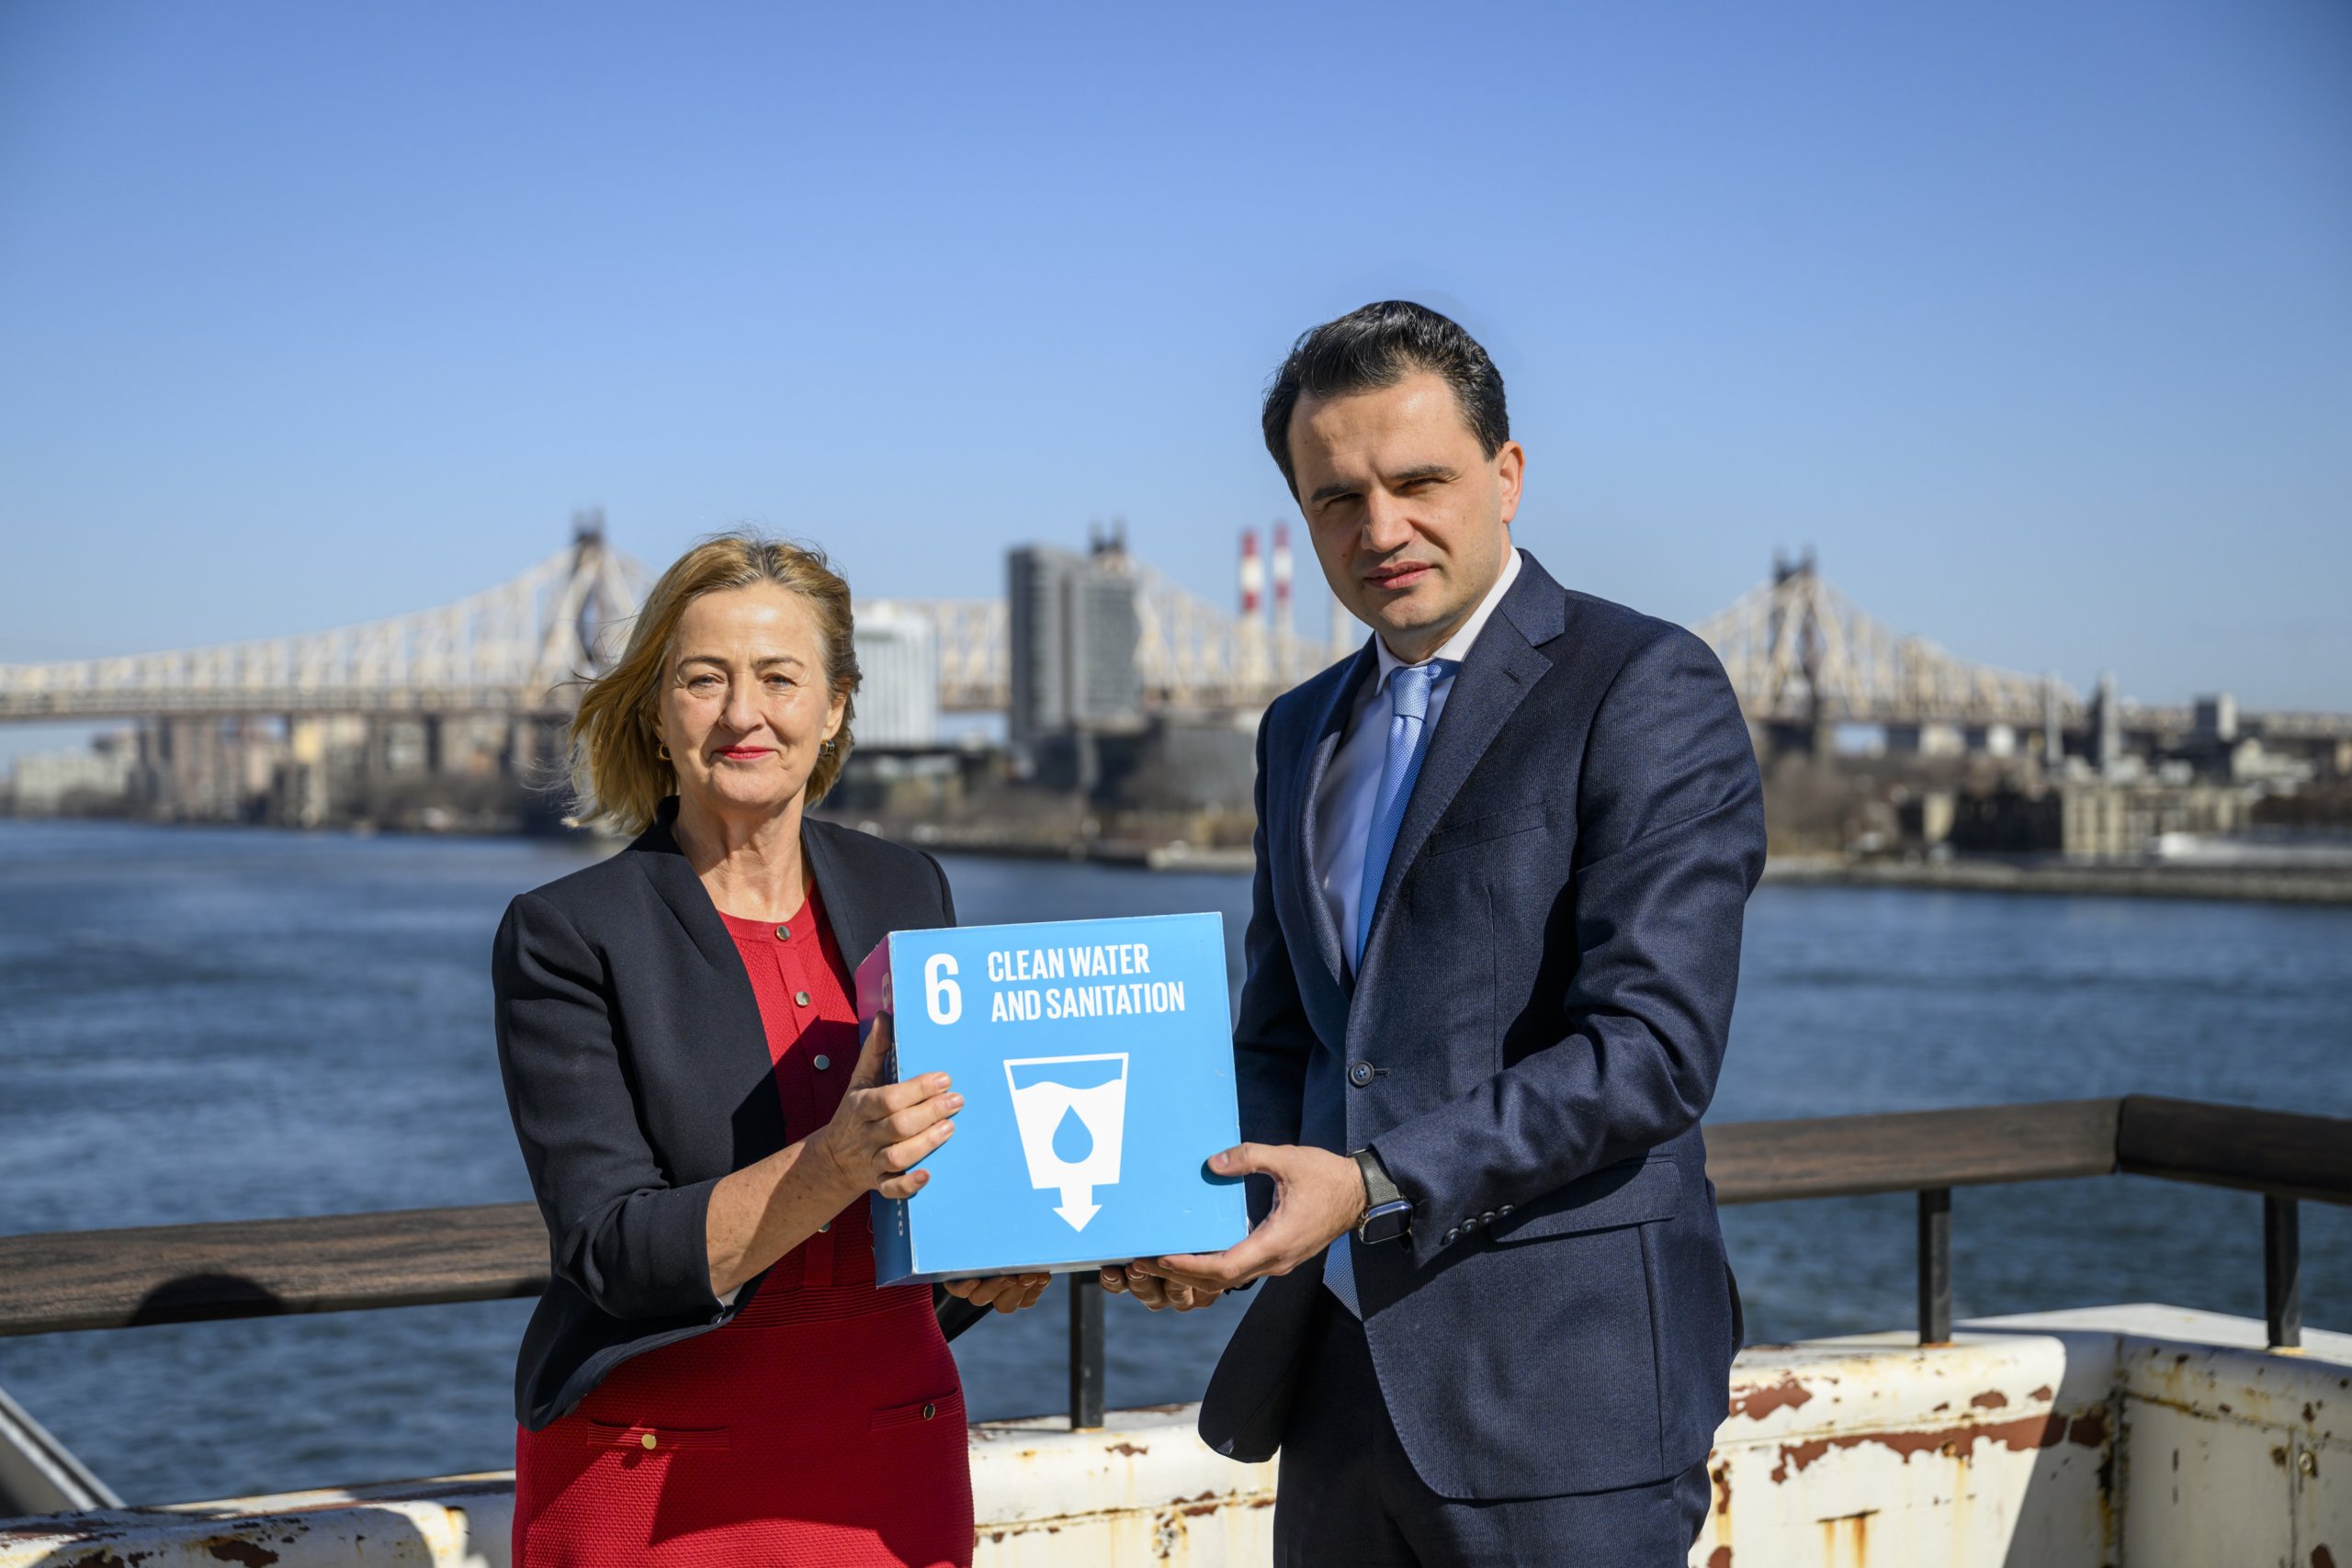 UN Photo/Mark Garten Ambassadors Yoka Brandt of the Kingdom of the Netherlands (left) and Jonibek Ismoil Hikmat of the Republic of Tajikistan at UN Headquarters in New York. Their countries are co-hosts of the 2023 UN Water Conference.